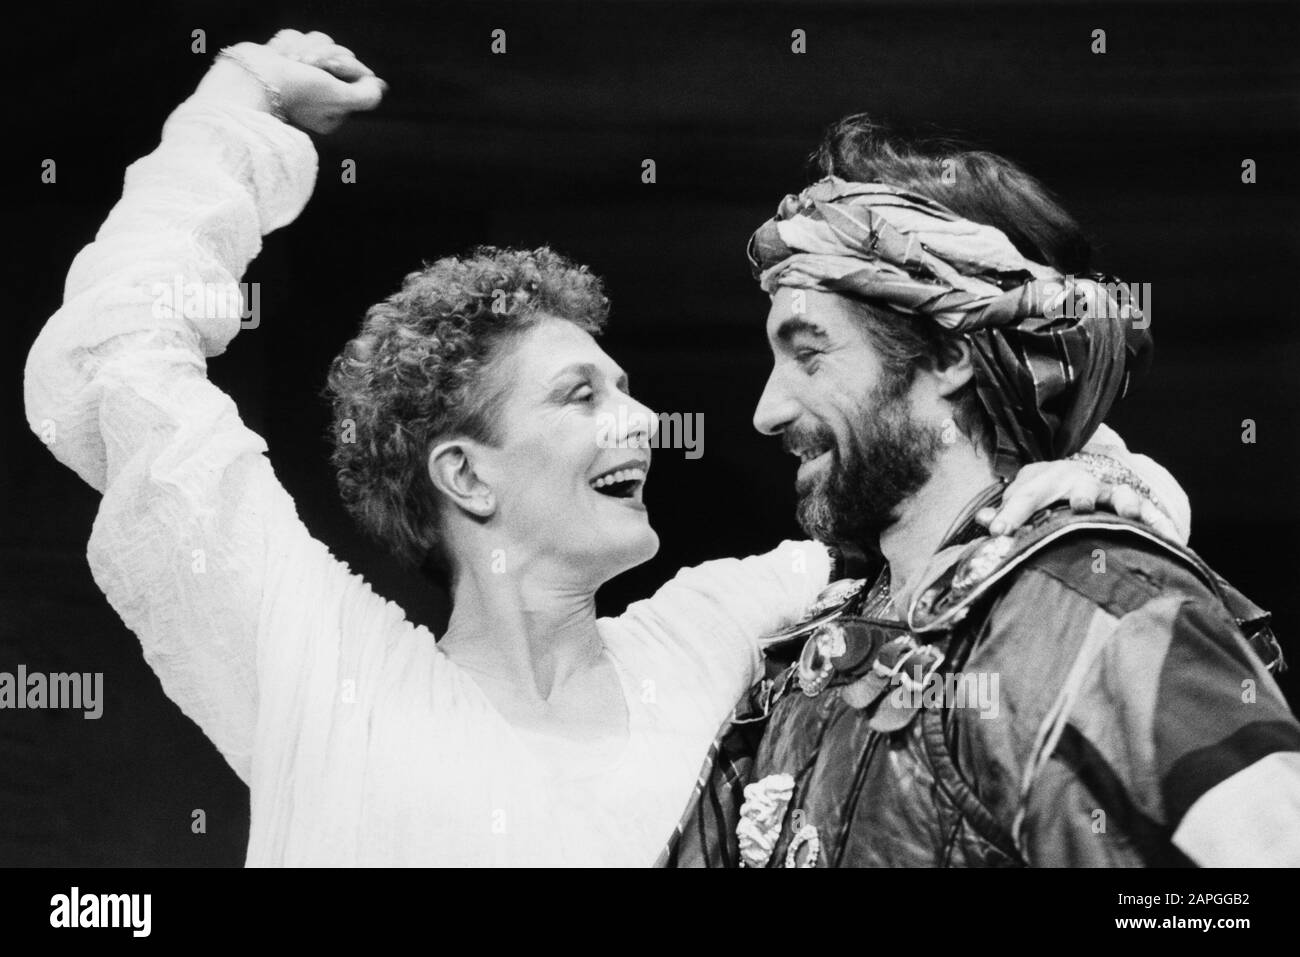 Vanessa Redgrave (Cleopatra) and Timothy Dalton (Antony) in ANTONY AND CLEOPATRA by Shakespeare directed by Toby Robertson at the Theatre Royal Haymarket, London in 1986. Vanessa Redgrave, actress and political activist, born in London in 1937. Awarded CBE in 1967. In a long-term relationship with Timothy Dalton from 1971 to 1986 Stock Photo